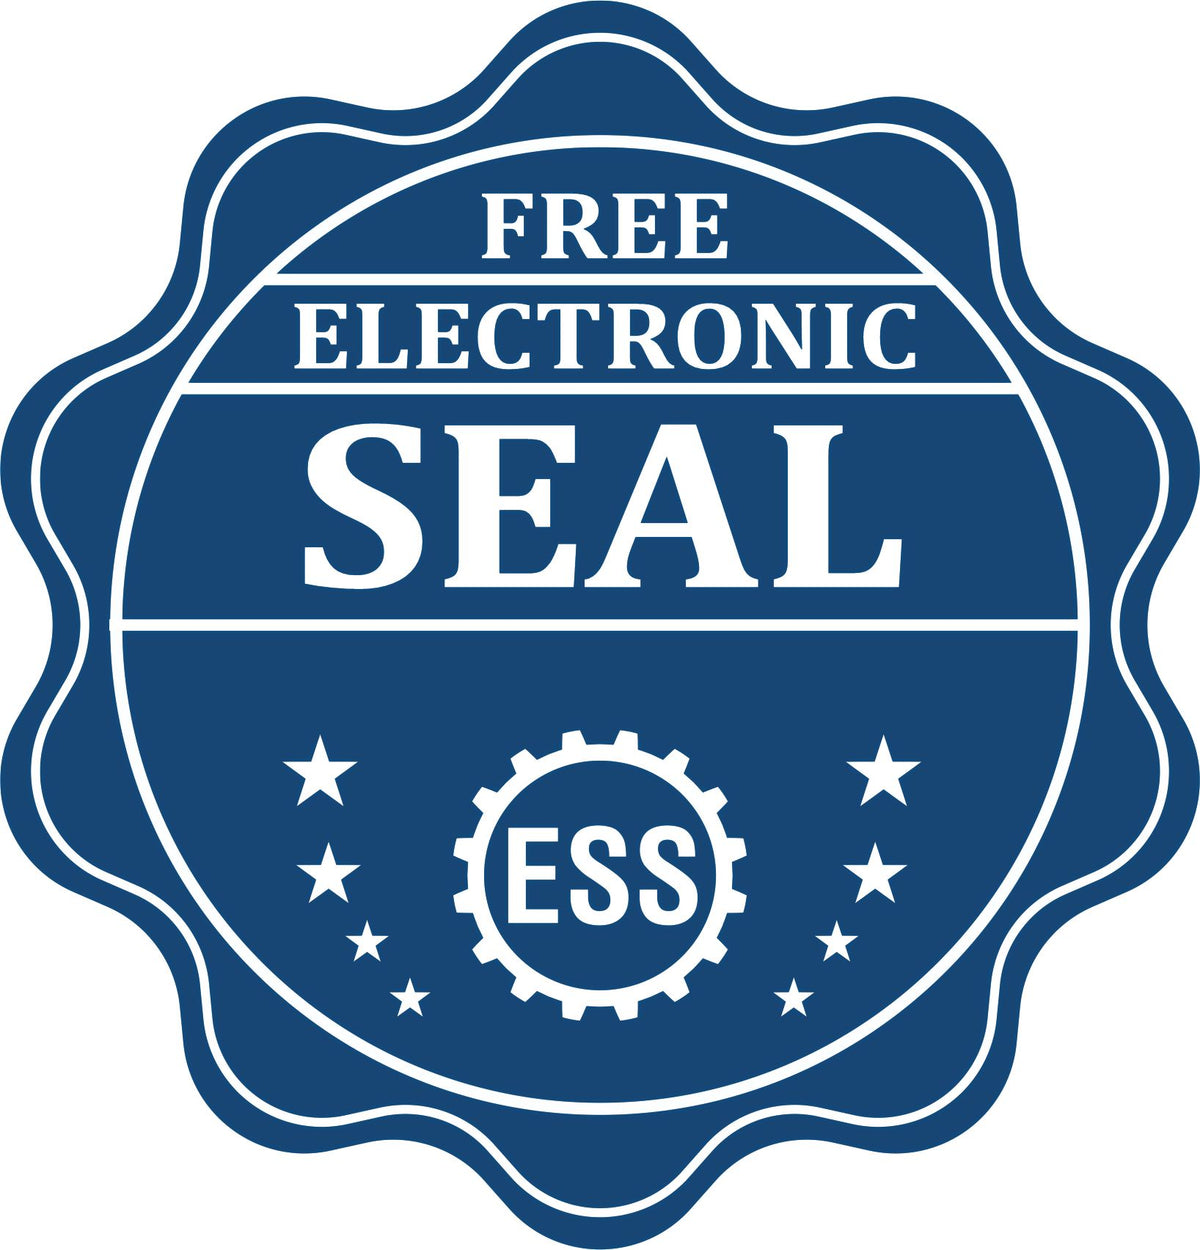 A badge showing a free electronic seal for the Gift Virginia Landscape Architect Seal with stars and the ESS gear on the emblem.